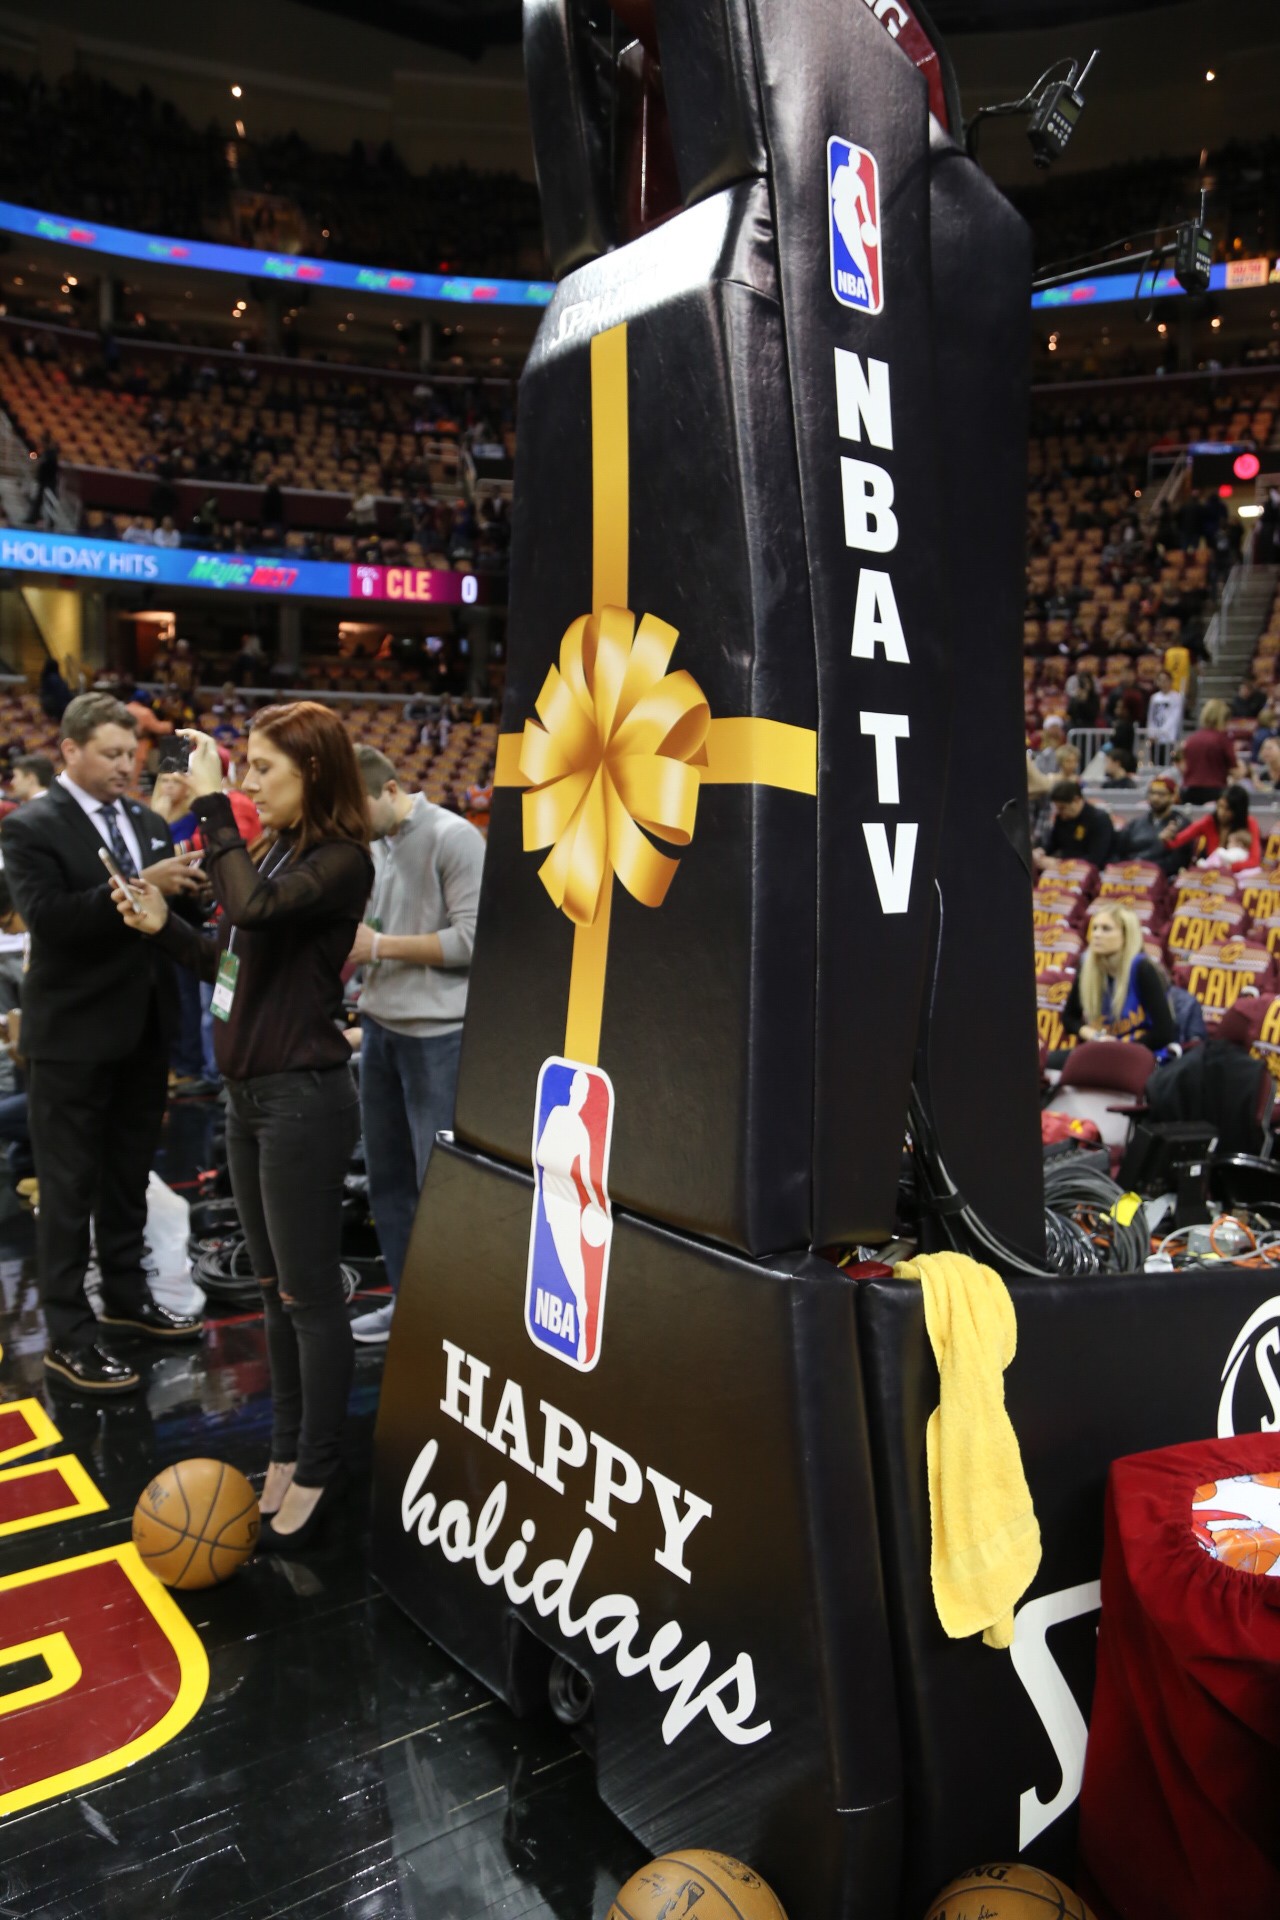 PHOTOS: Cleveland Cavaliers Defeat the Golden State Warriors Christmas Day